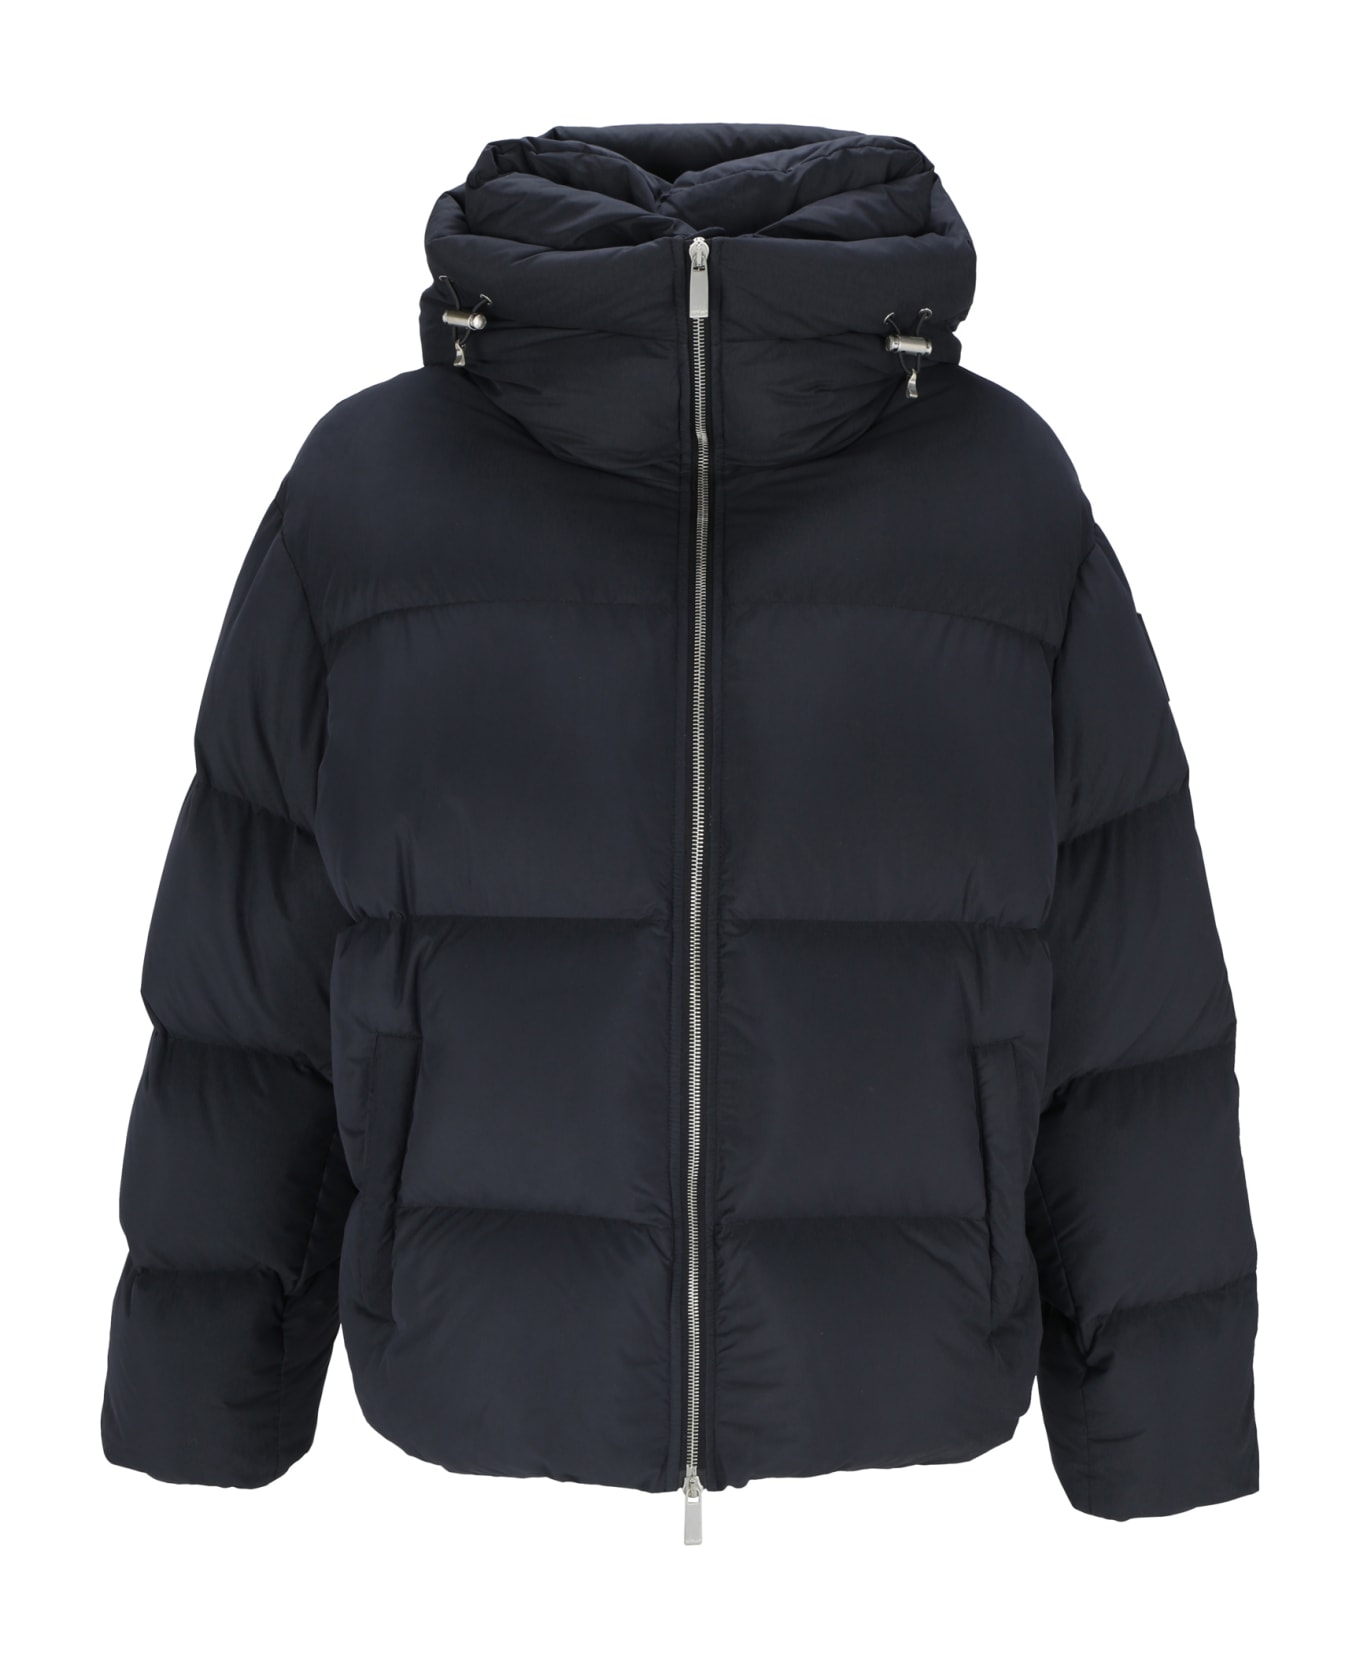 Off-White Patch Arrow Down Puffer - Black Blac